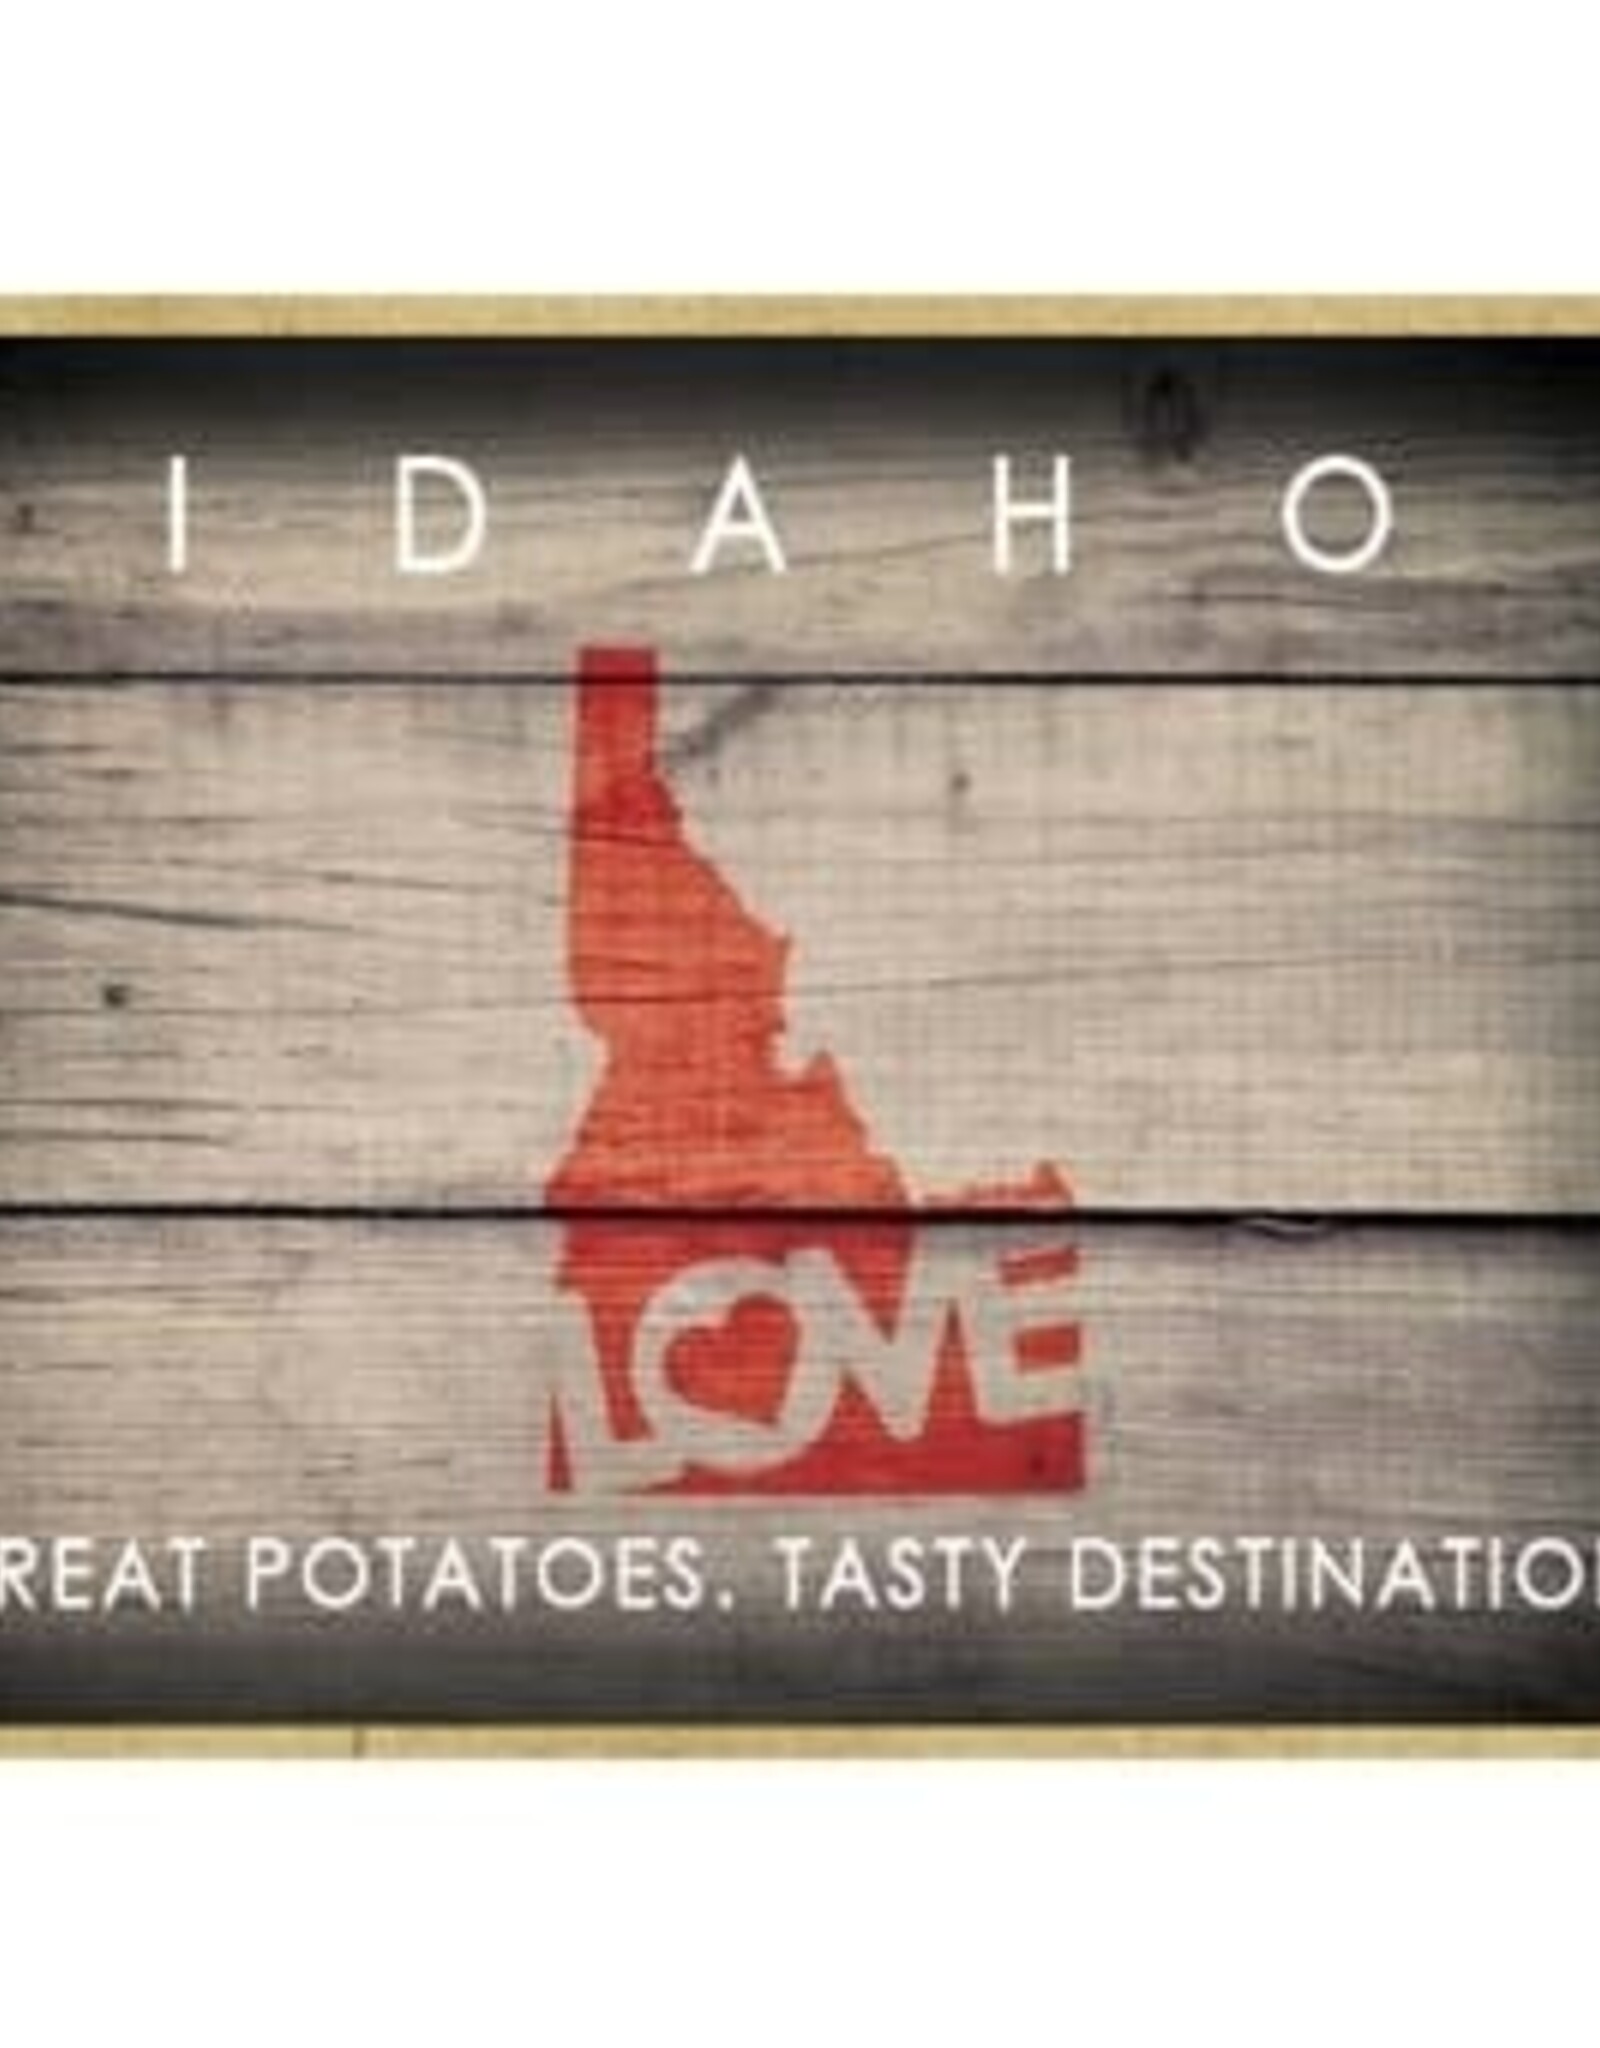 Dog Is Good Refrigerator Magnet - Idaho - State Outline with "Love" and State Motto